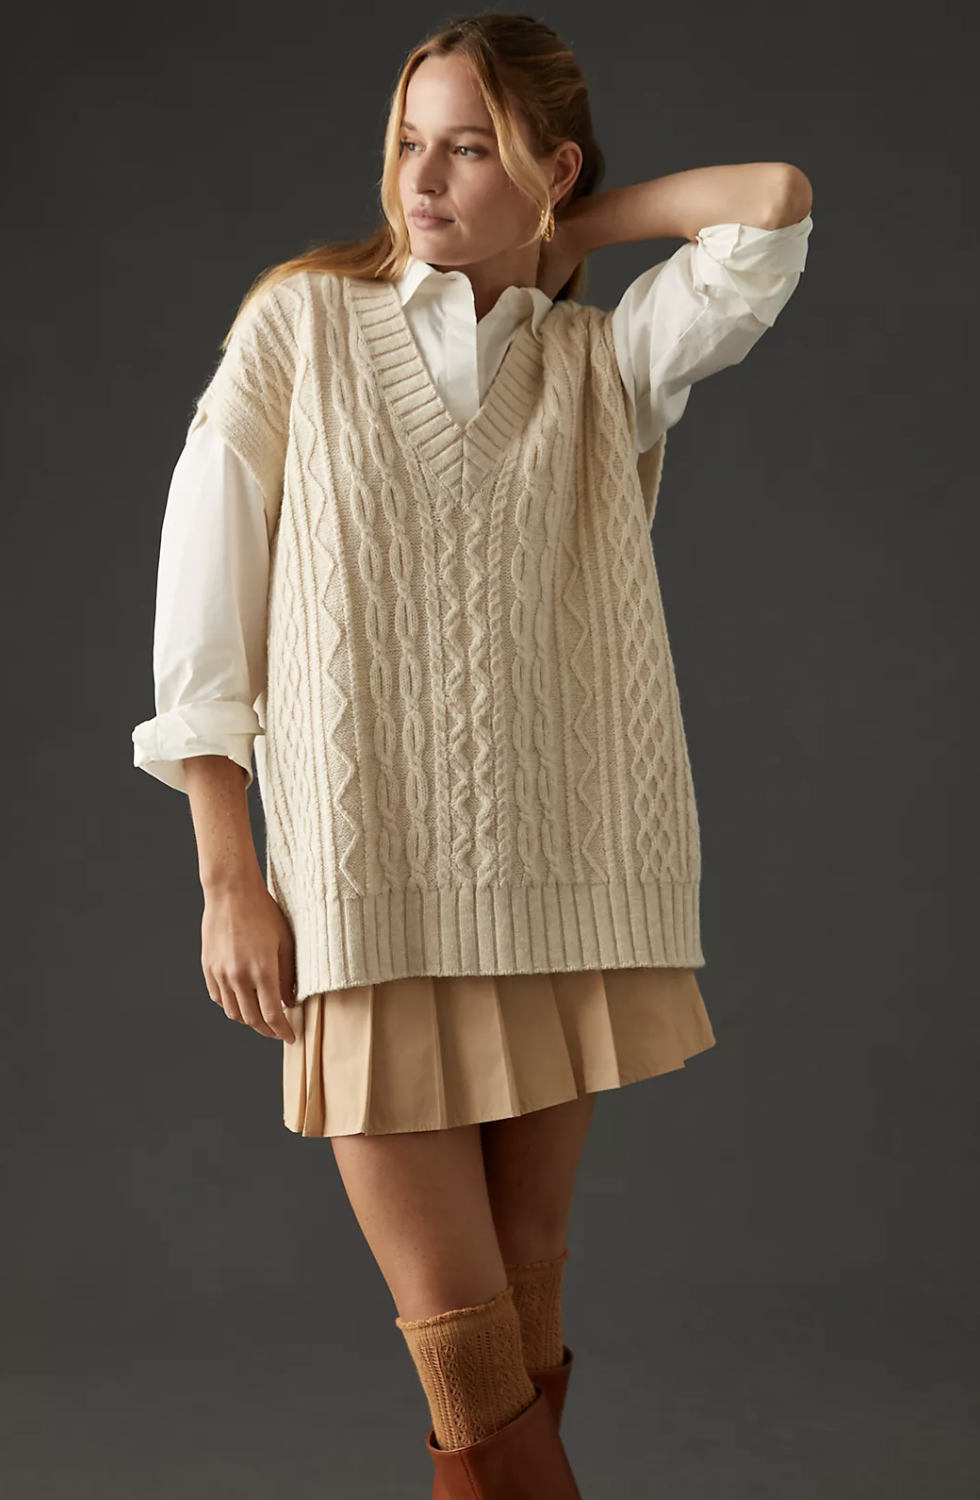 model wearing the cream vest over a shirt with a skirt and boots